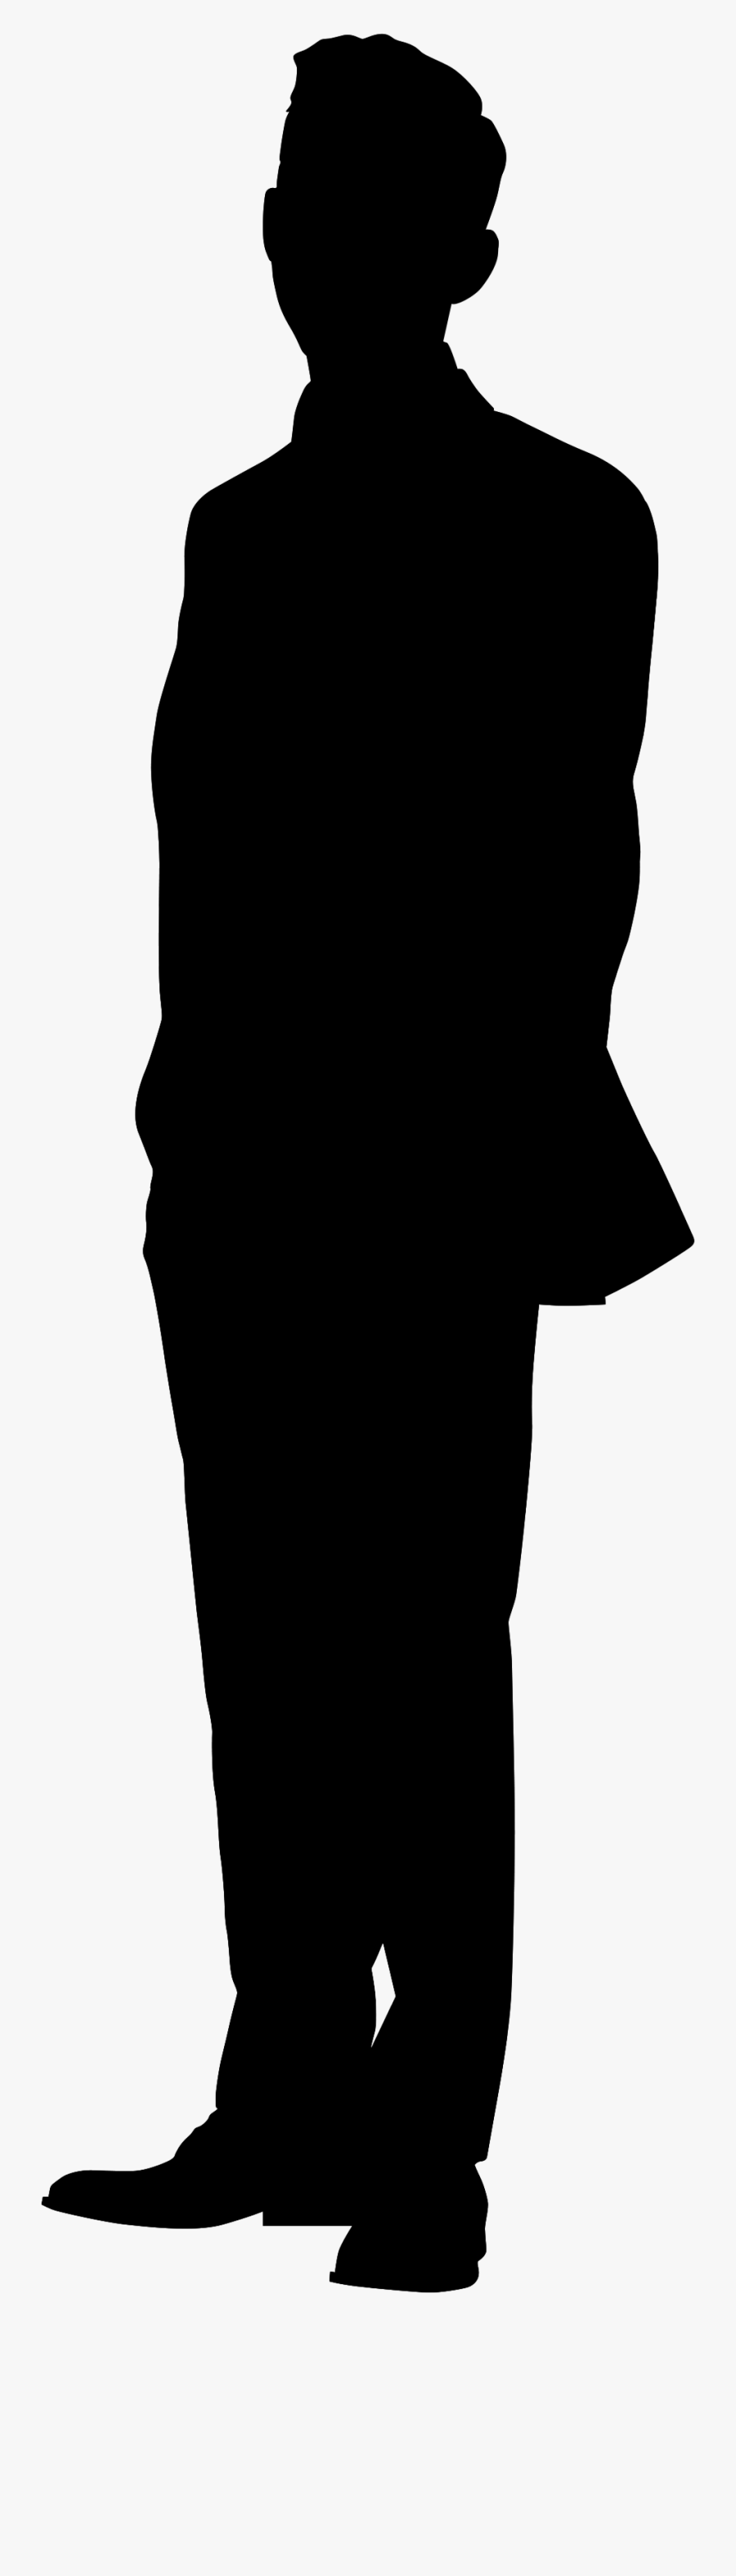 Silhouette Person Playwright - Portable Network Graphics, Transparent Clipart